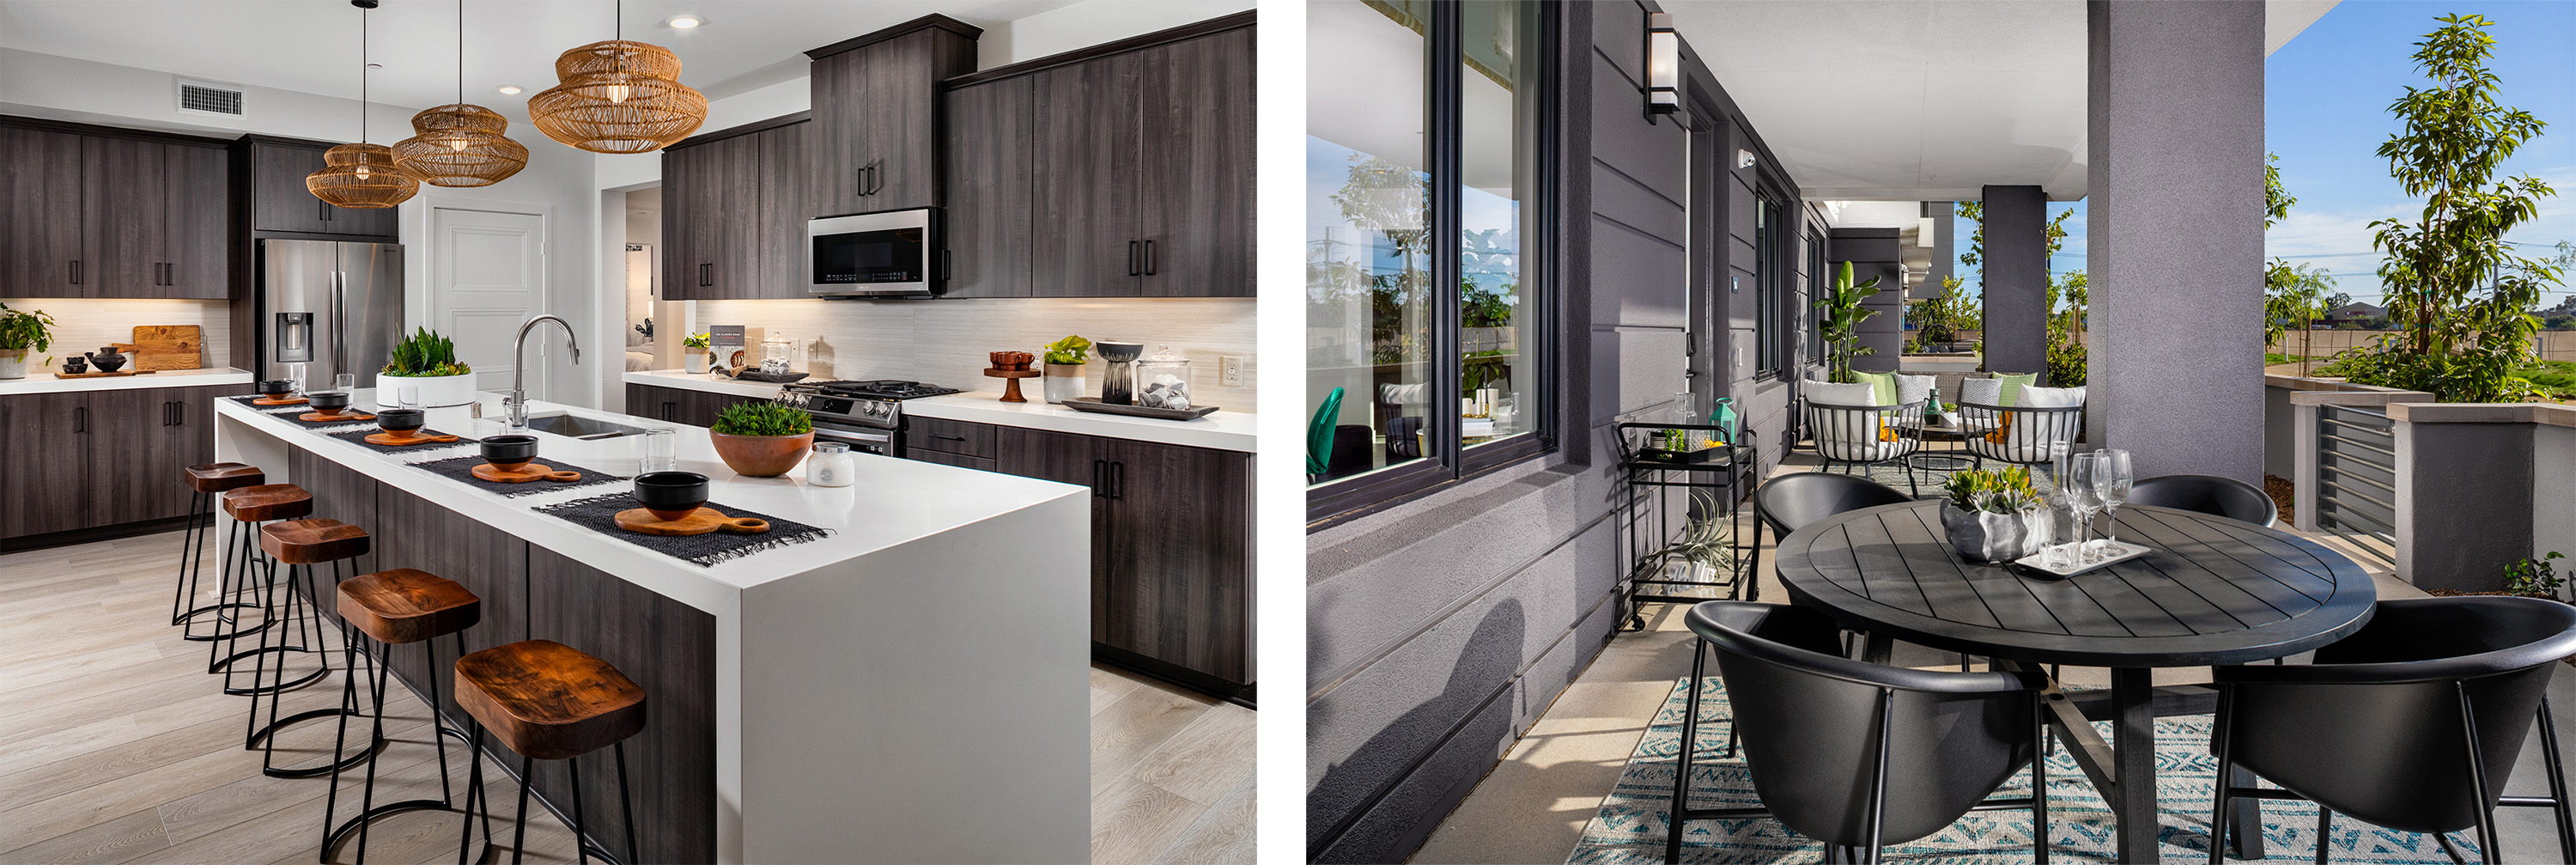 Multifamily kitchen and patio modern